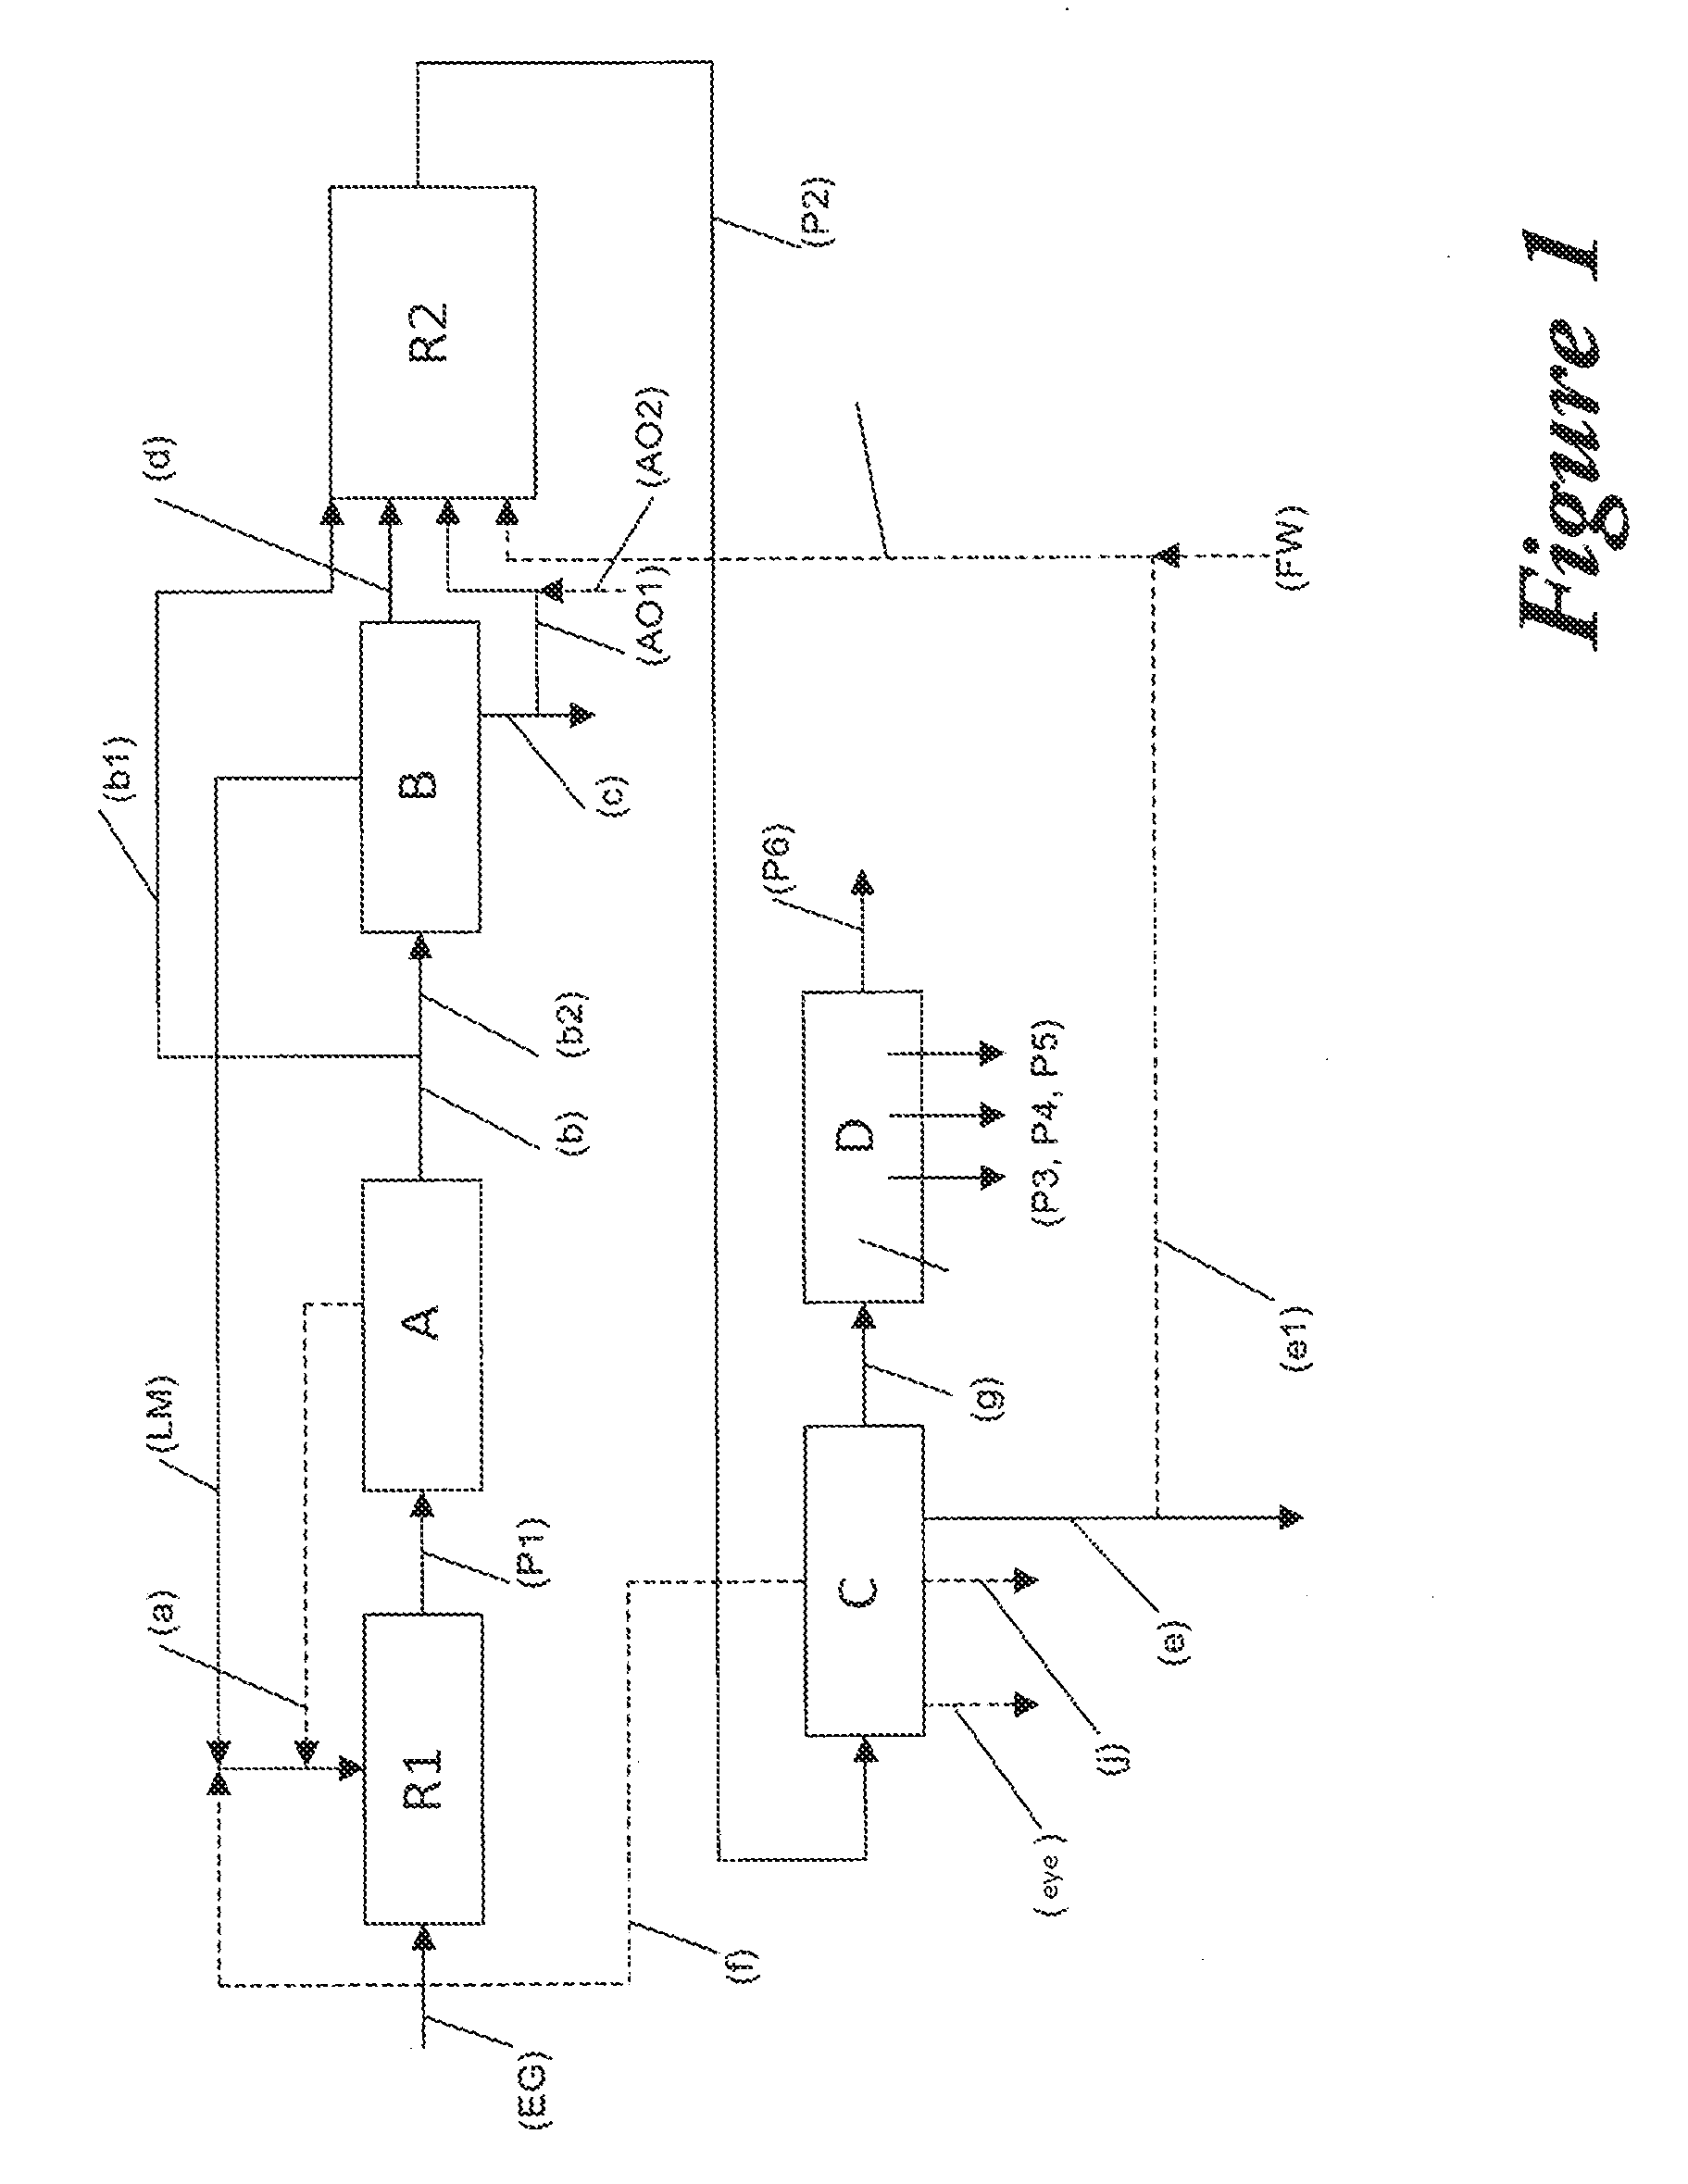 Process and apparatus for preparing alkylene oxides and alkylene glycols